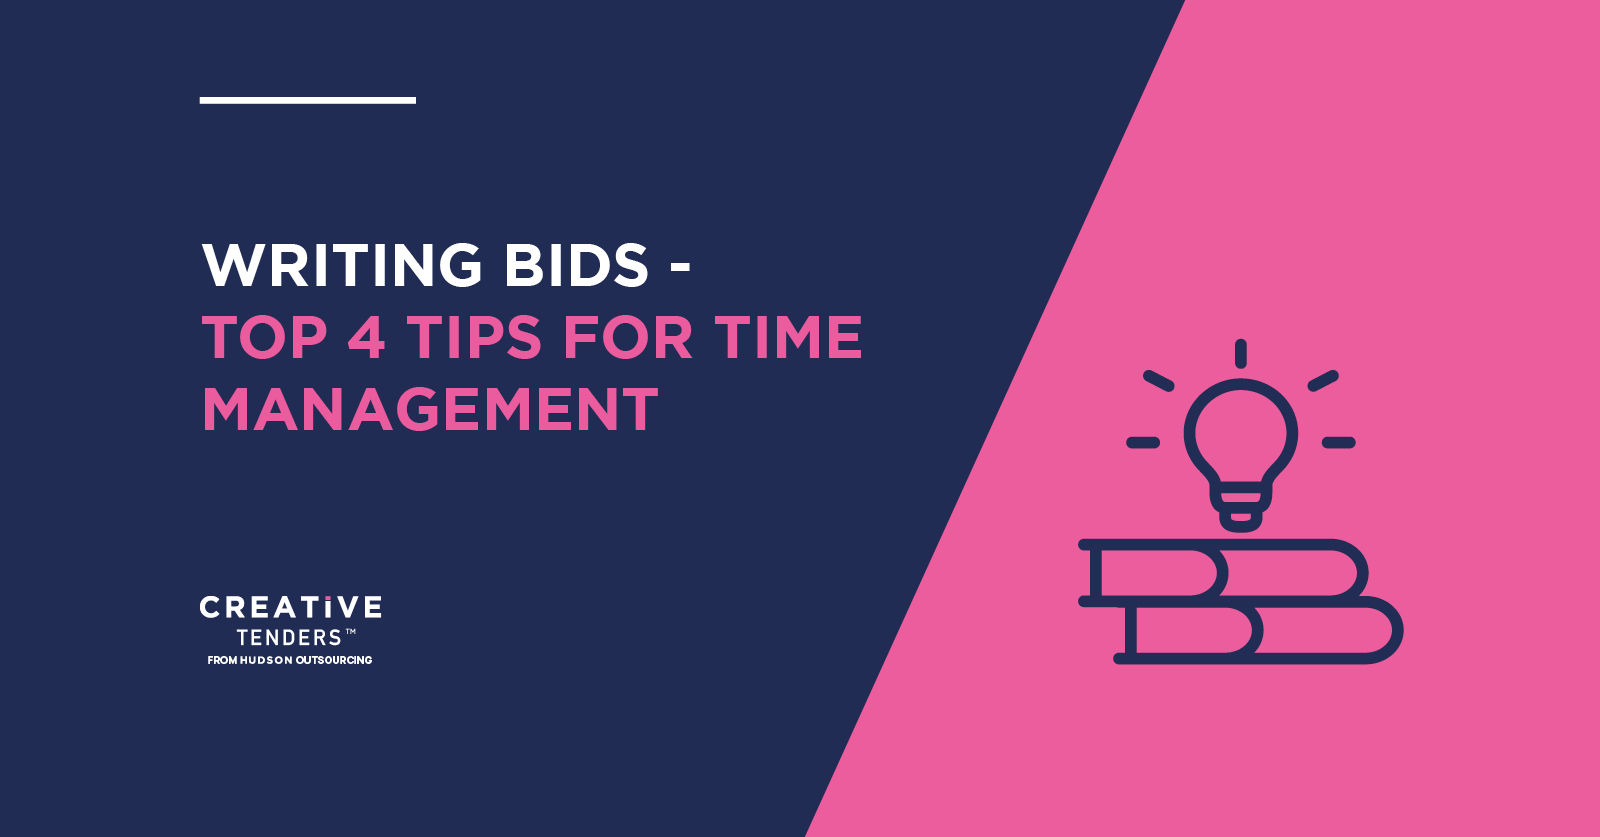 WRITING BIDS – TOP 4 TIPS FOR TIME MANAGEMENT